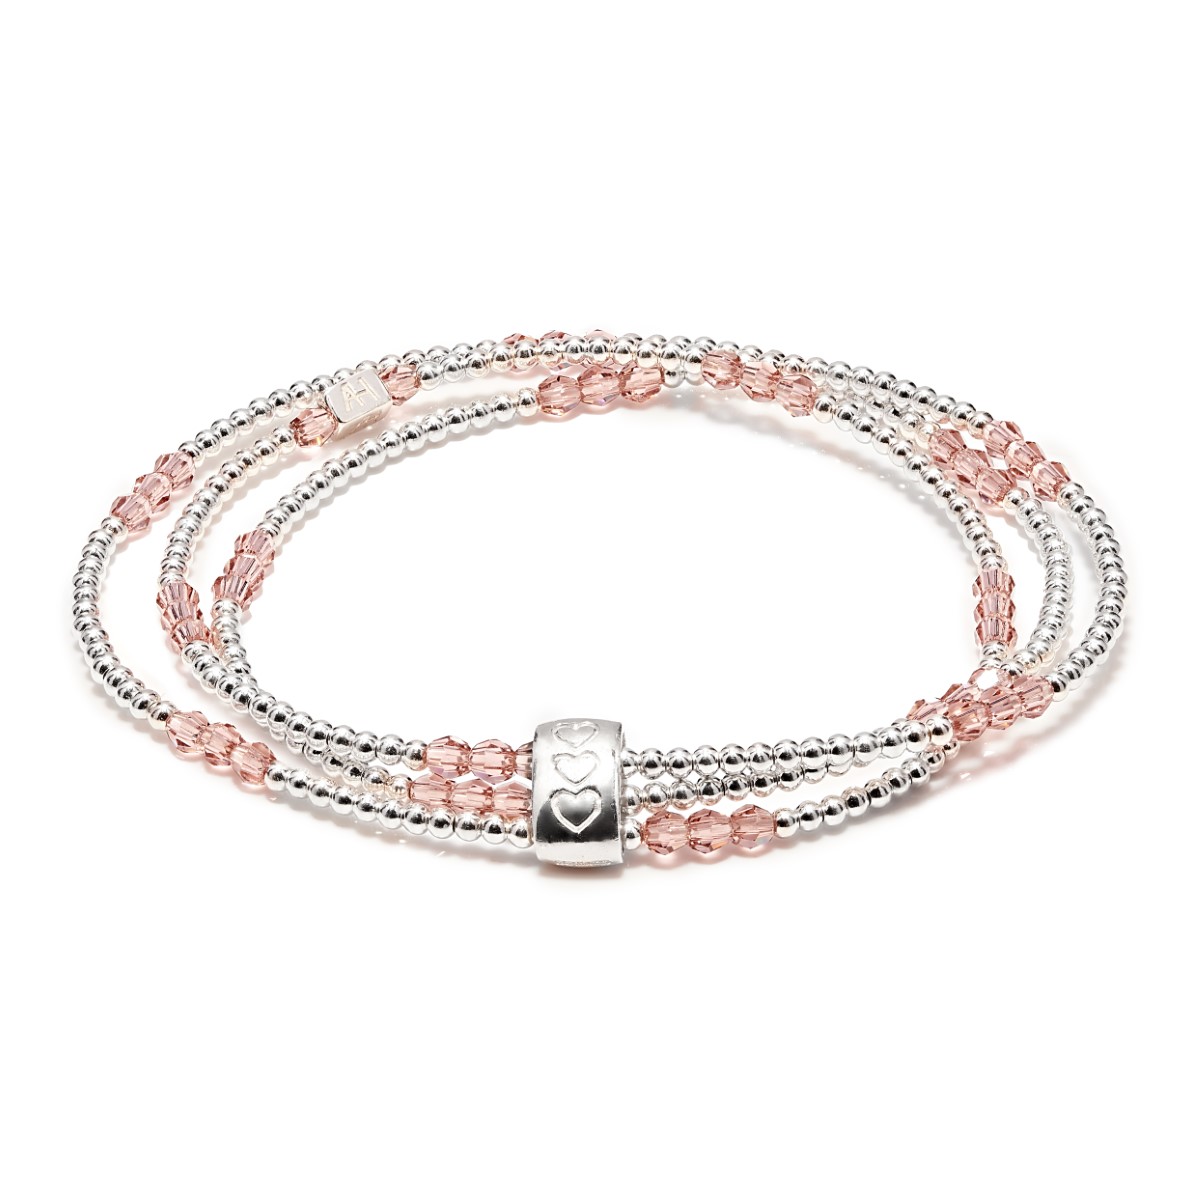 Annie Haak Blush Rose and Silver Looped Bracelet